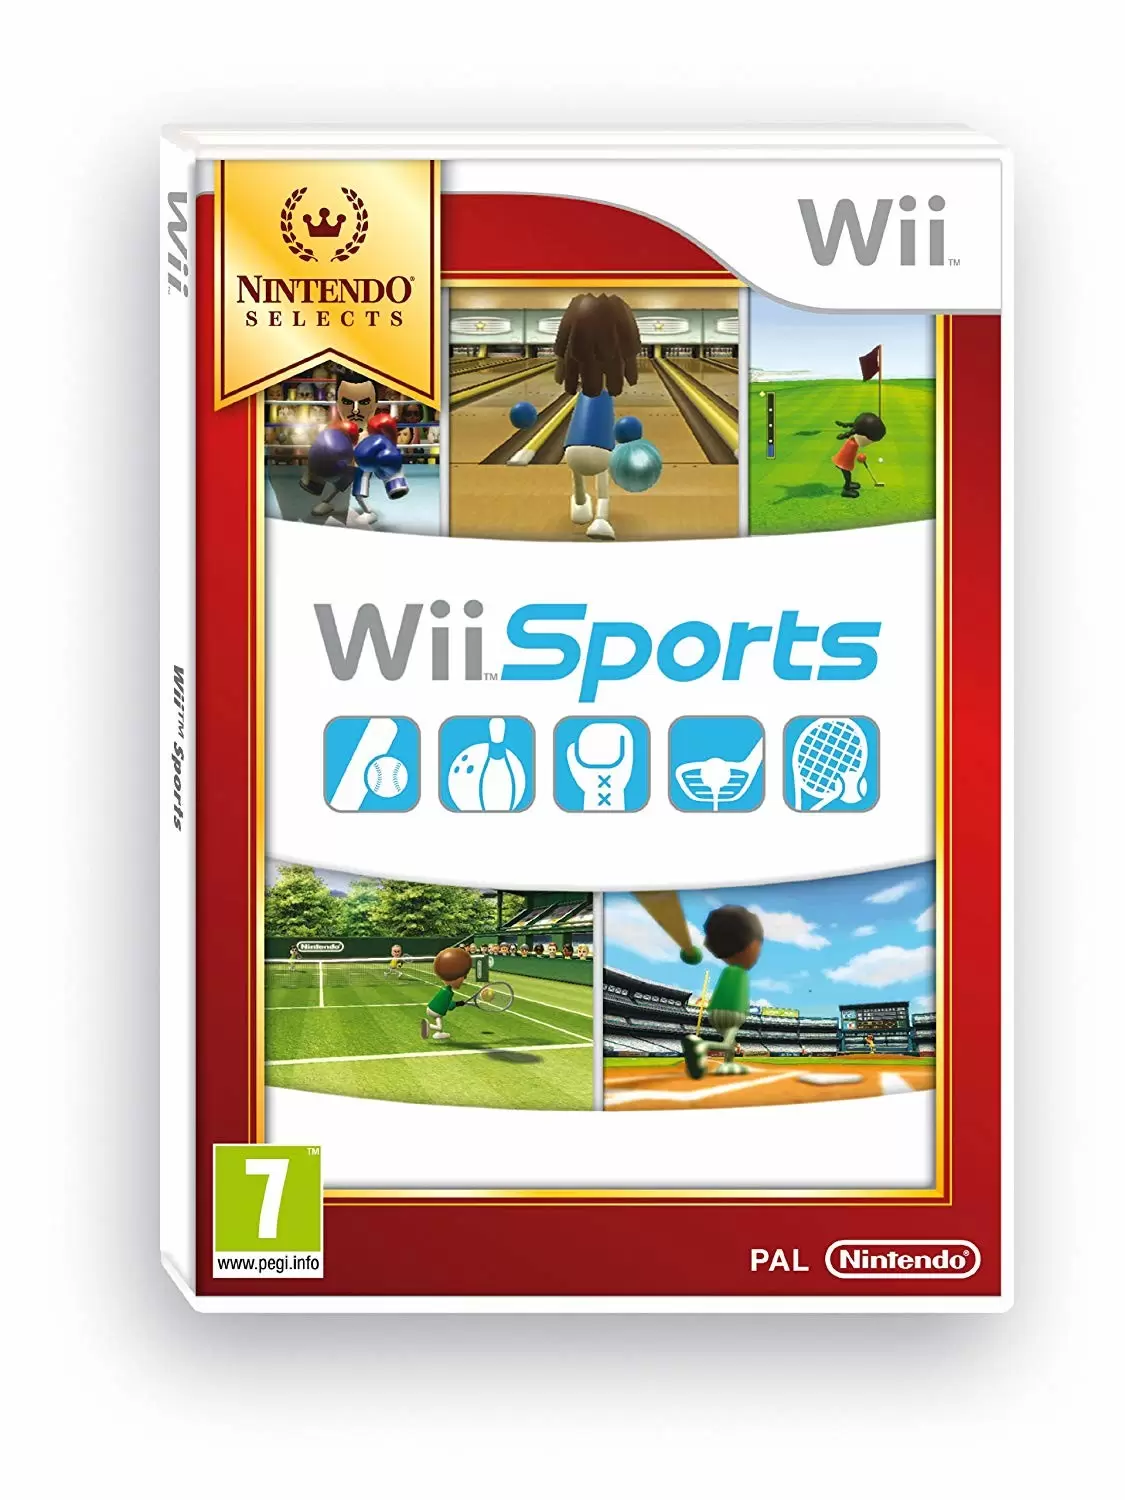 Nintendo Wii Games - Wii Sports (Nintendo Selects)